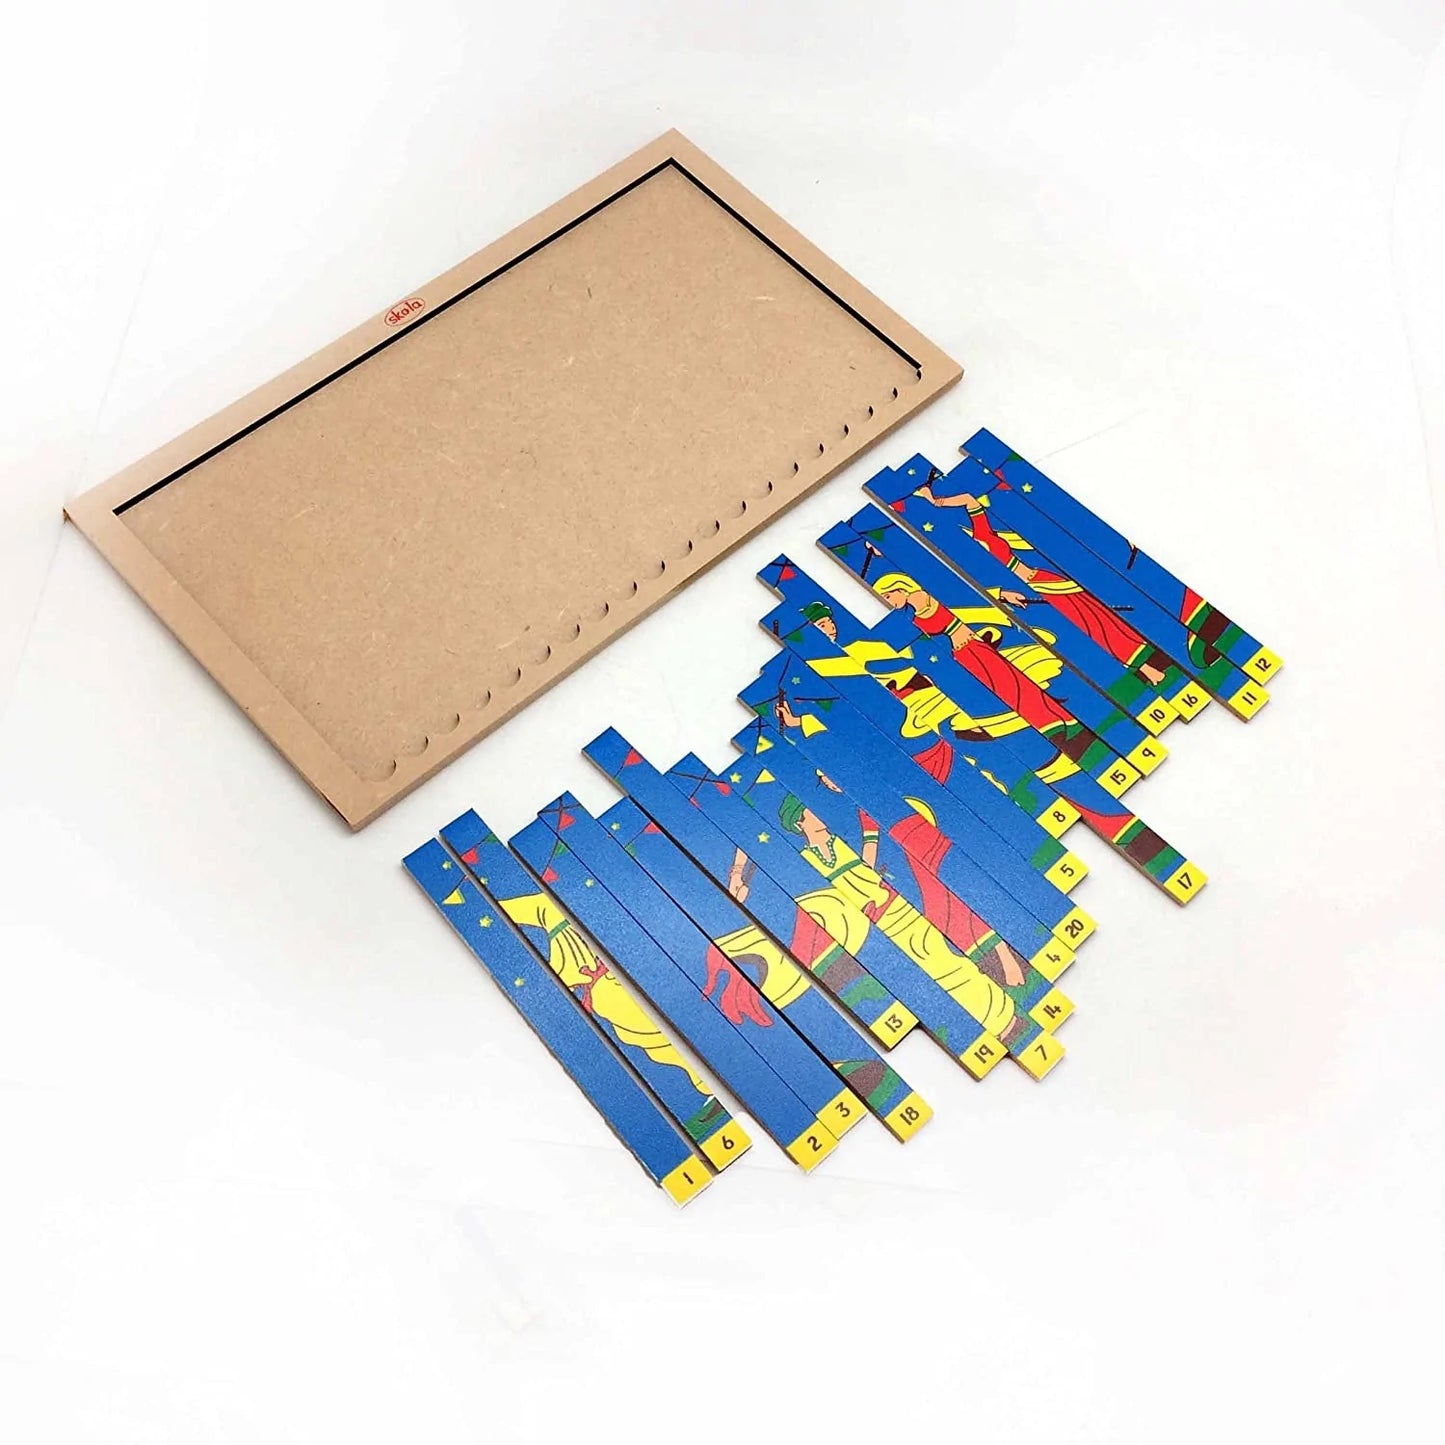 Buy Sequencing Puzzle Dandiya Wooden Toy - Content - SkilloToys.com